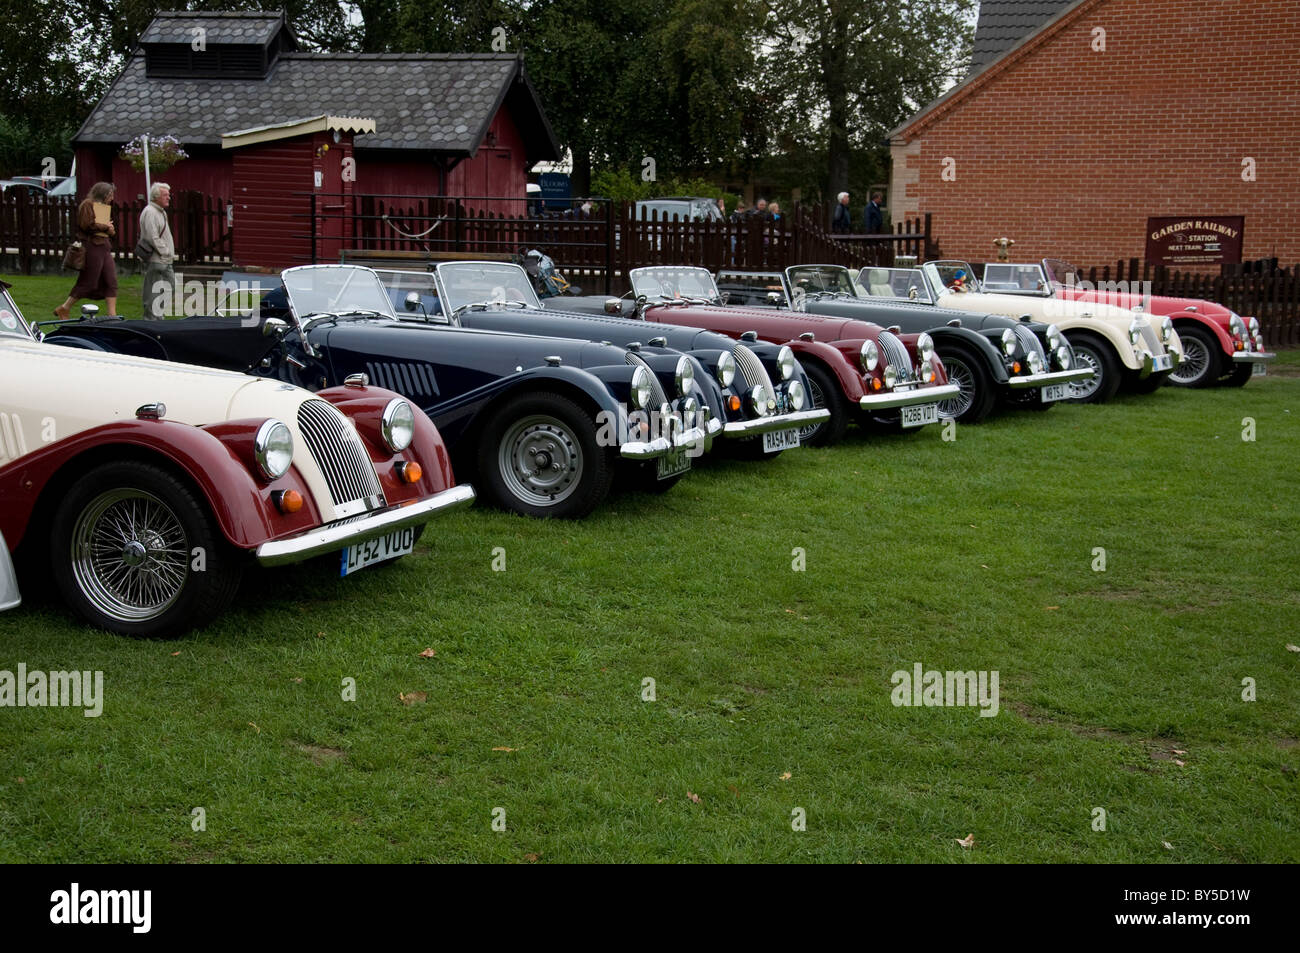 Row (line) of Morgan cars at Bressingham Steam Museum in Norfolk, England. Stock Photo